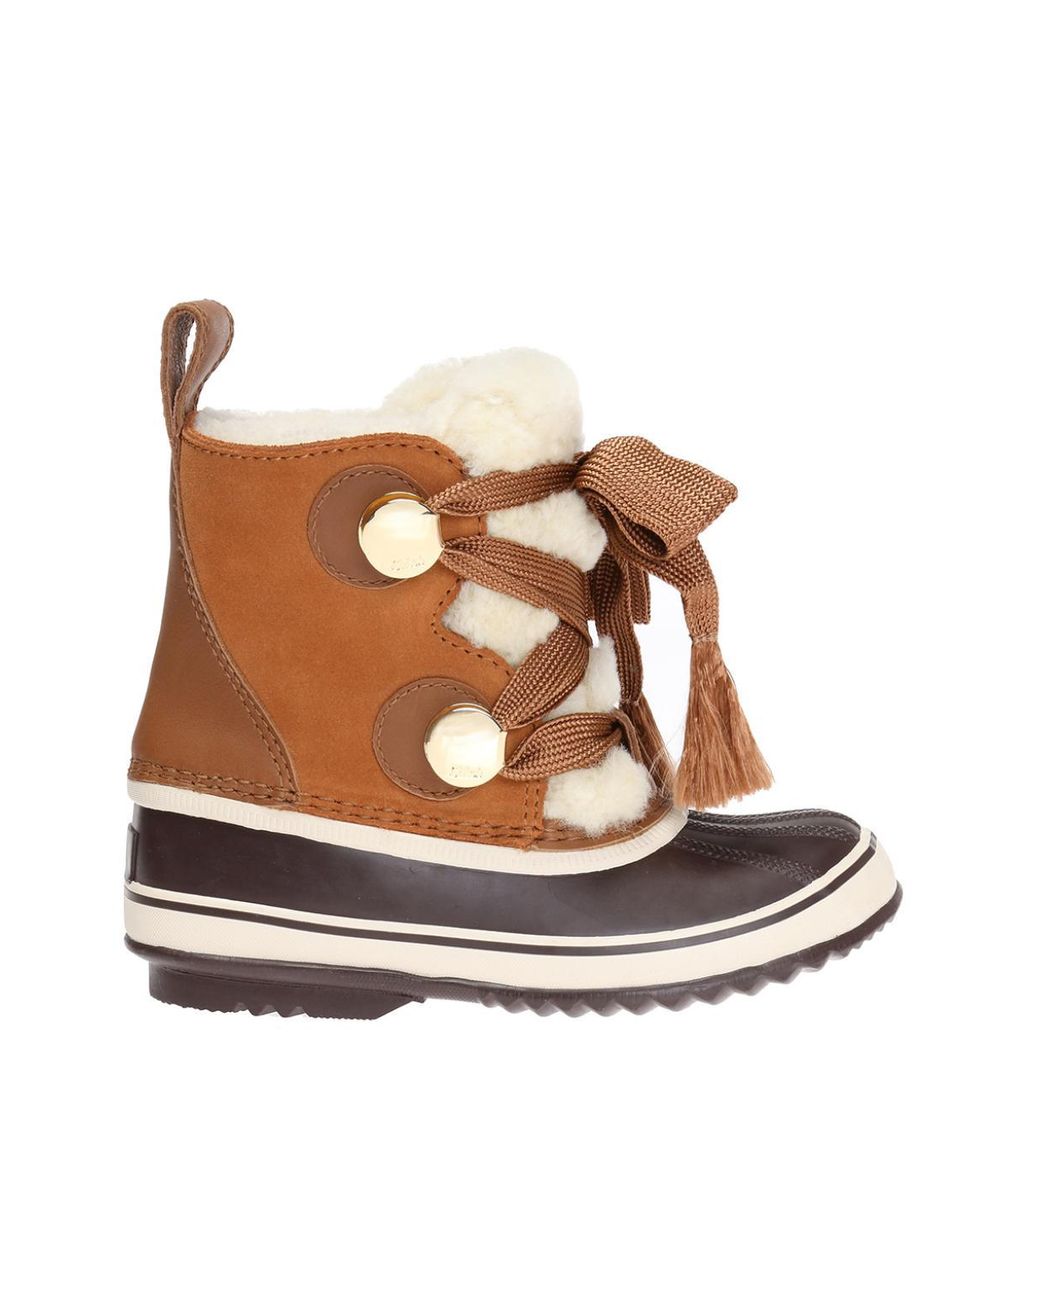 Chloé + Sorel Crosta Leather-trimmed Suede And Shearling Boots in ...